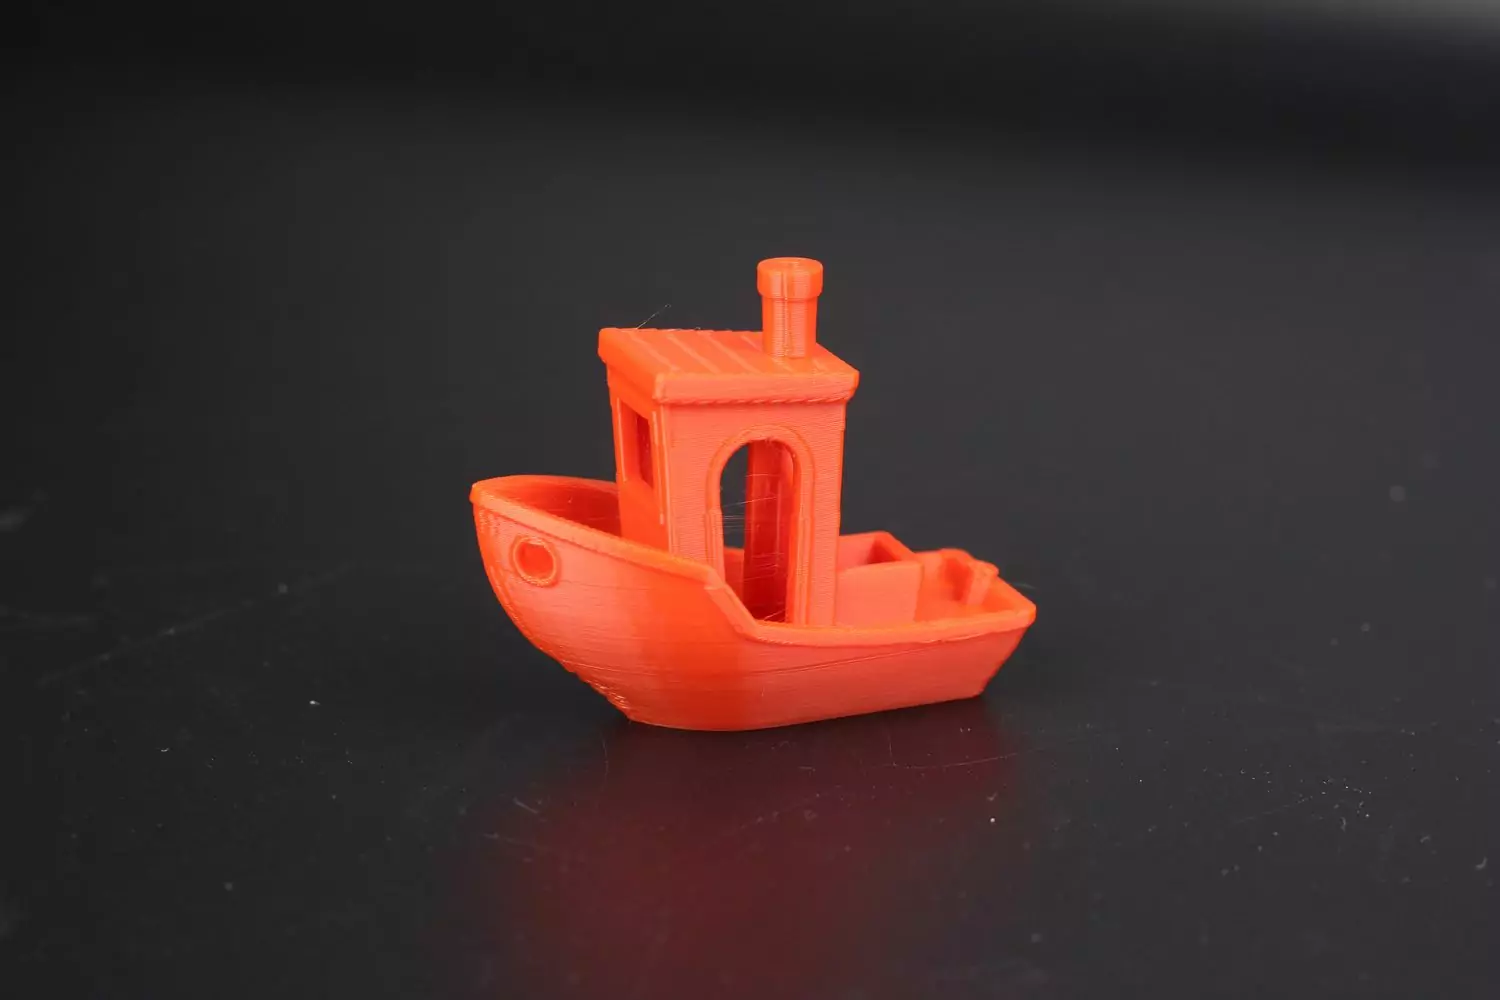 3D benchy printed on Ender 3 S1 Pro with Klipper and Sonic Pad2 | Creality Sonic Pad Review: Klipper Firmware with Compromises